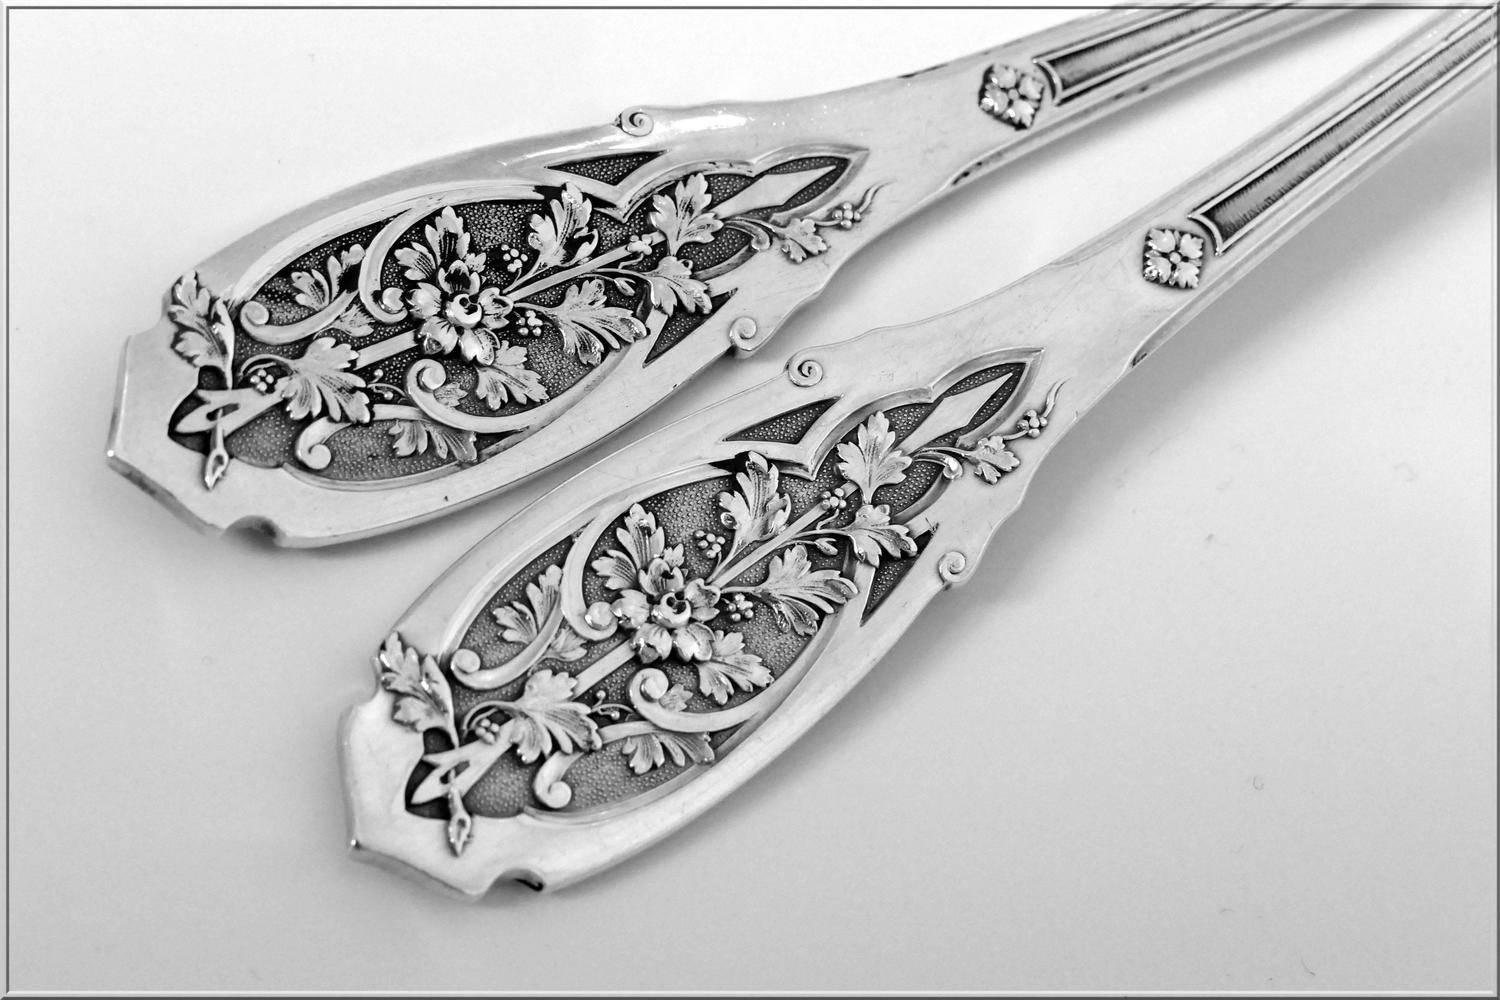 Late 19th Century Puiforcat Rare French All Sterling Silver Ice Cream Set 2 pieces Moderne Model